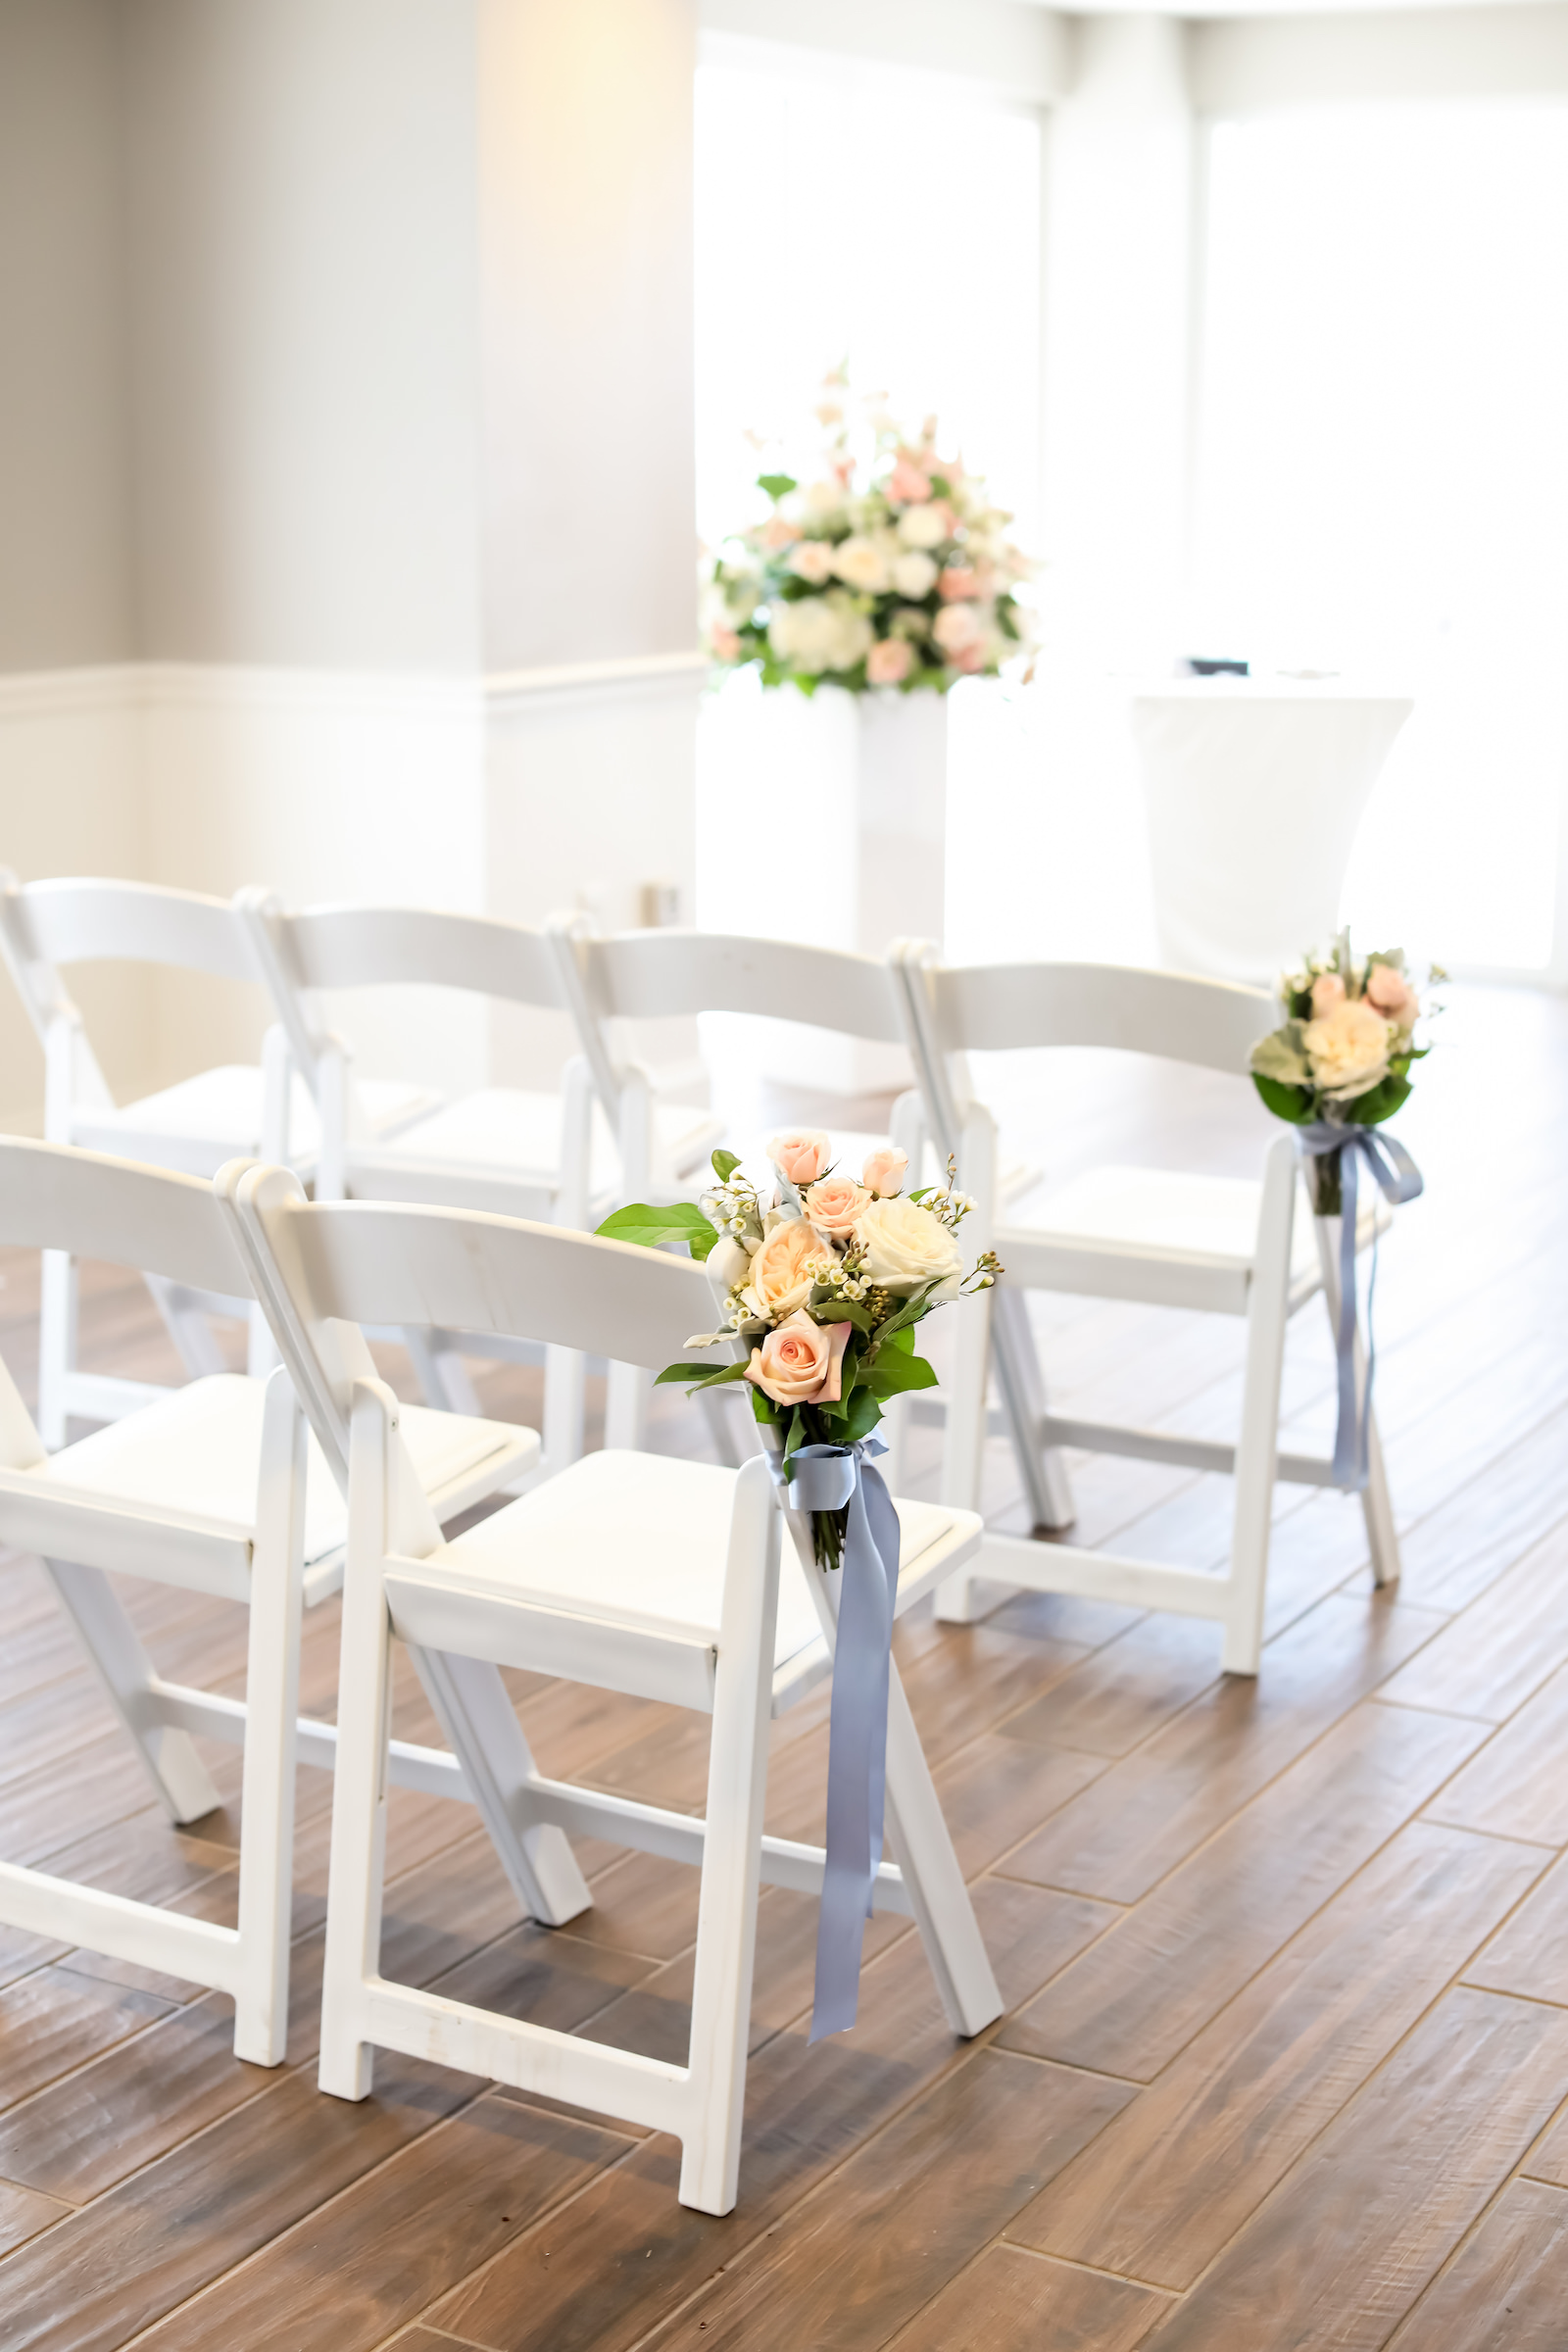 Indoor Wedding Ceremony at Clearwater Beach Venue Hyatt Regency Clearwater Beach | White Garden Chairs with Blush Pink and White Rose Floral Arrangements with Dusty Blue Grey Ribbon